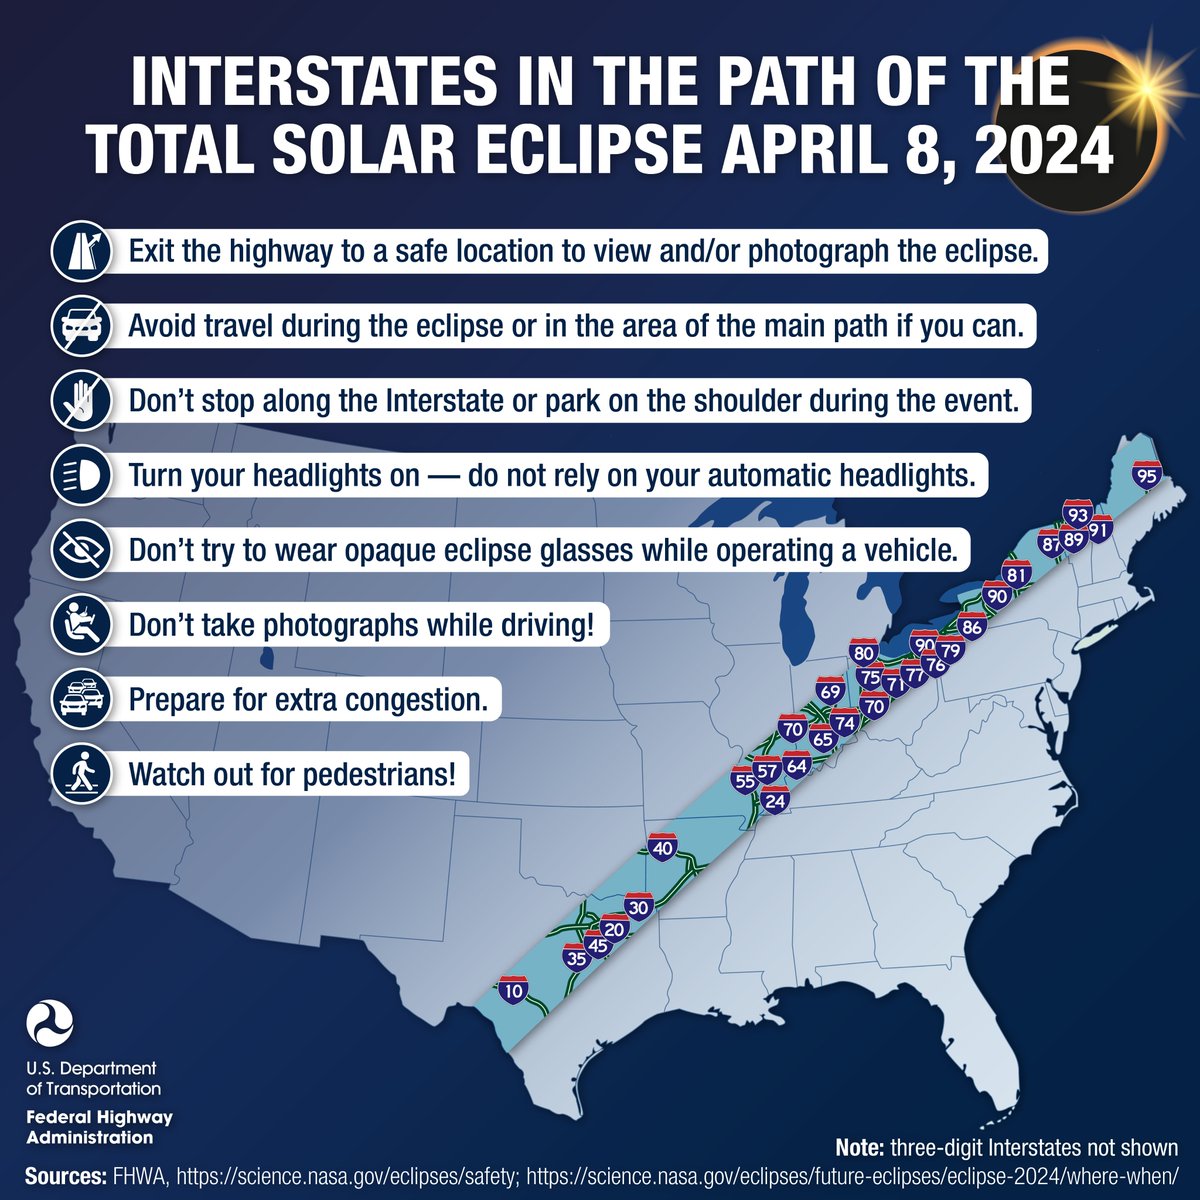 Happy solar eclipse day! 😎 Before embarking on your eclipse adventure, remember: ☀️Find a safe viewing location 🚫Don't stop along the interstate or park on the shoulder during the event 📵Don't take photos while driving 🚶 Watch for pedestrians 🚗Allow extra travel time